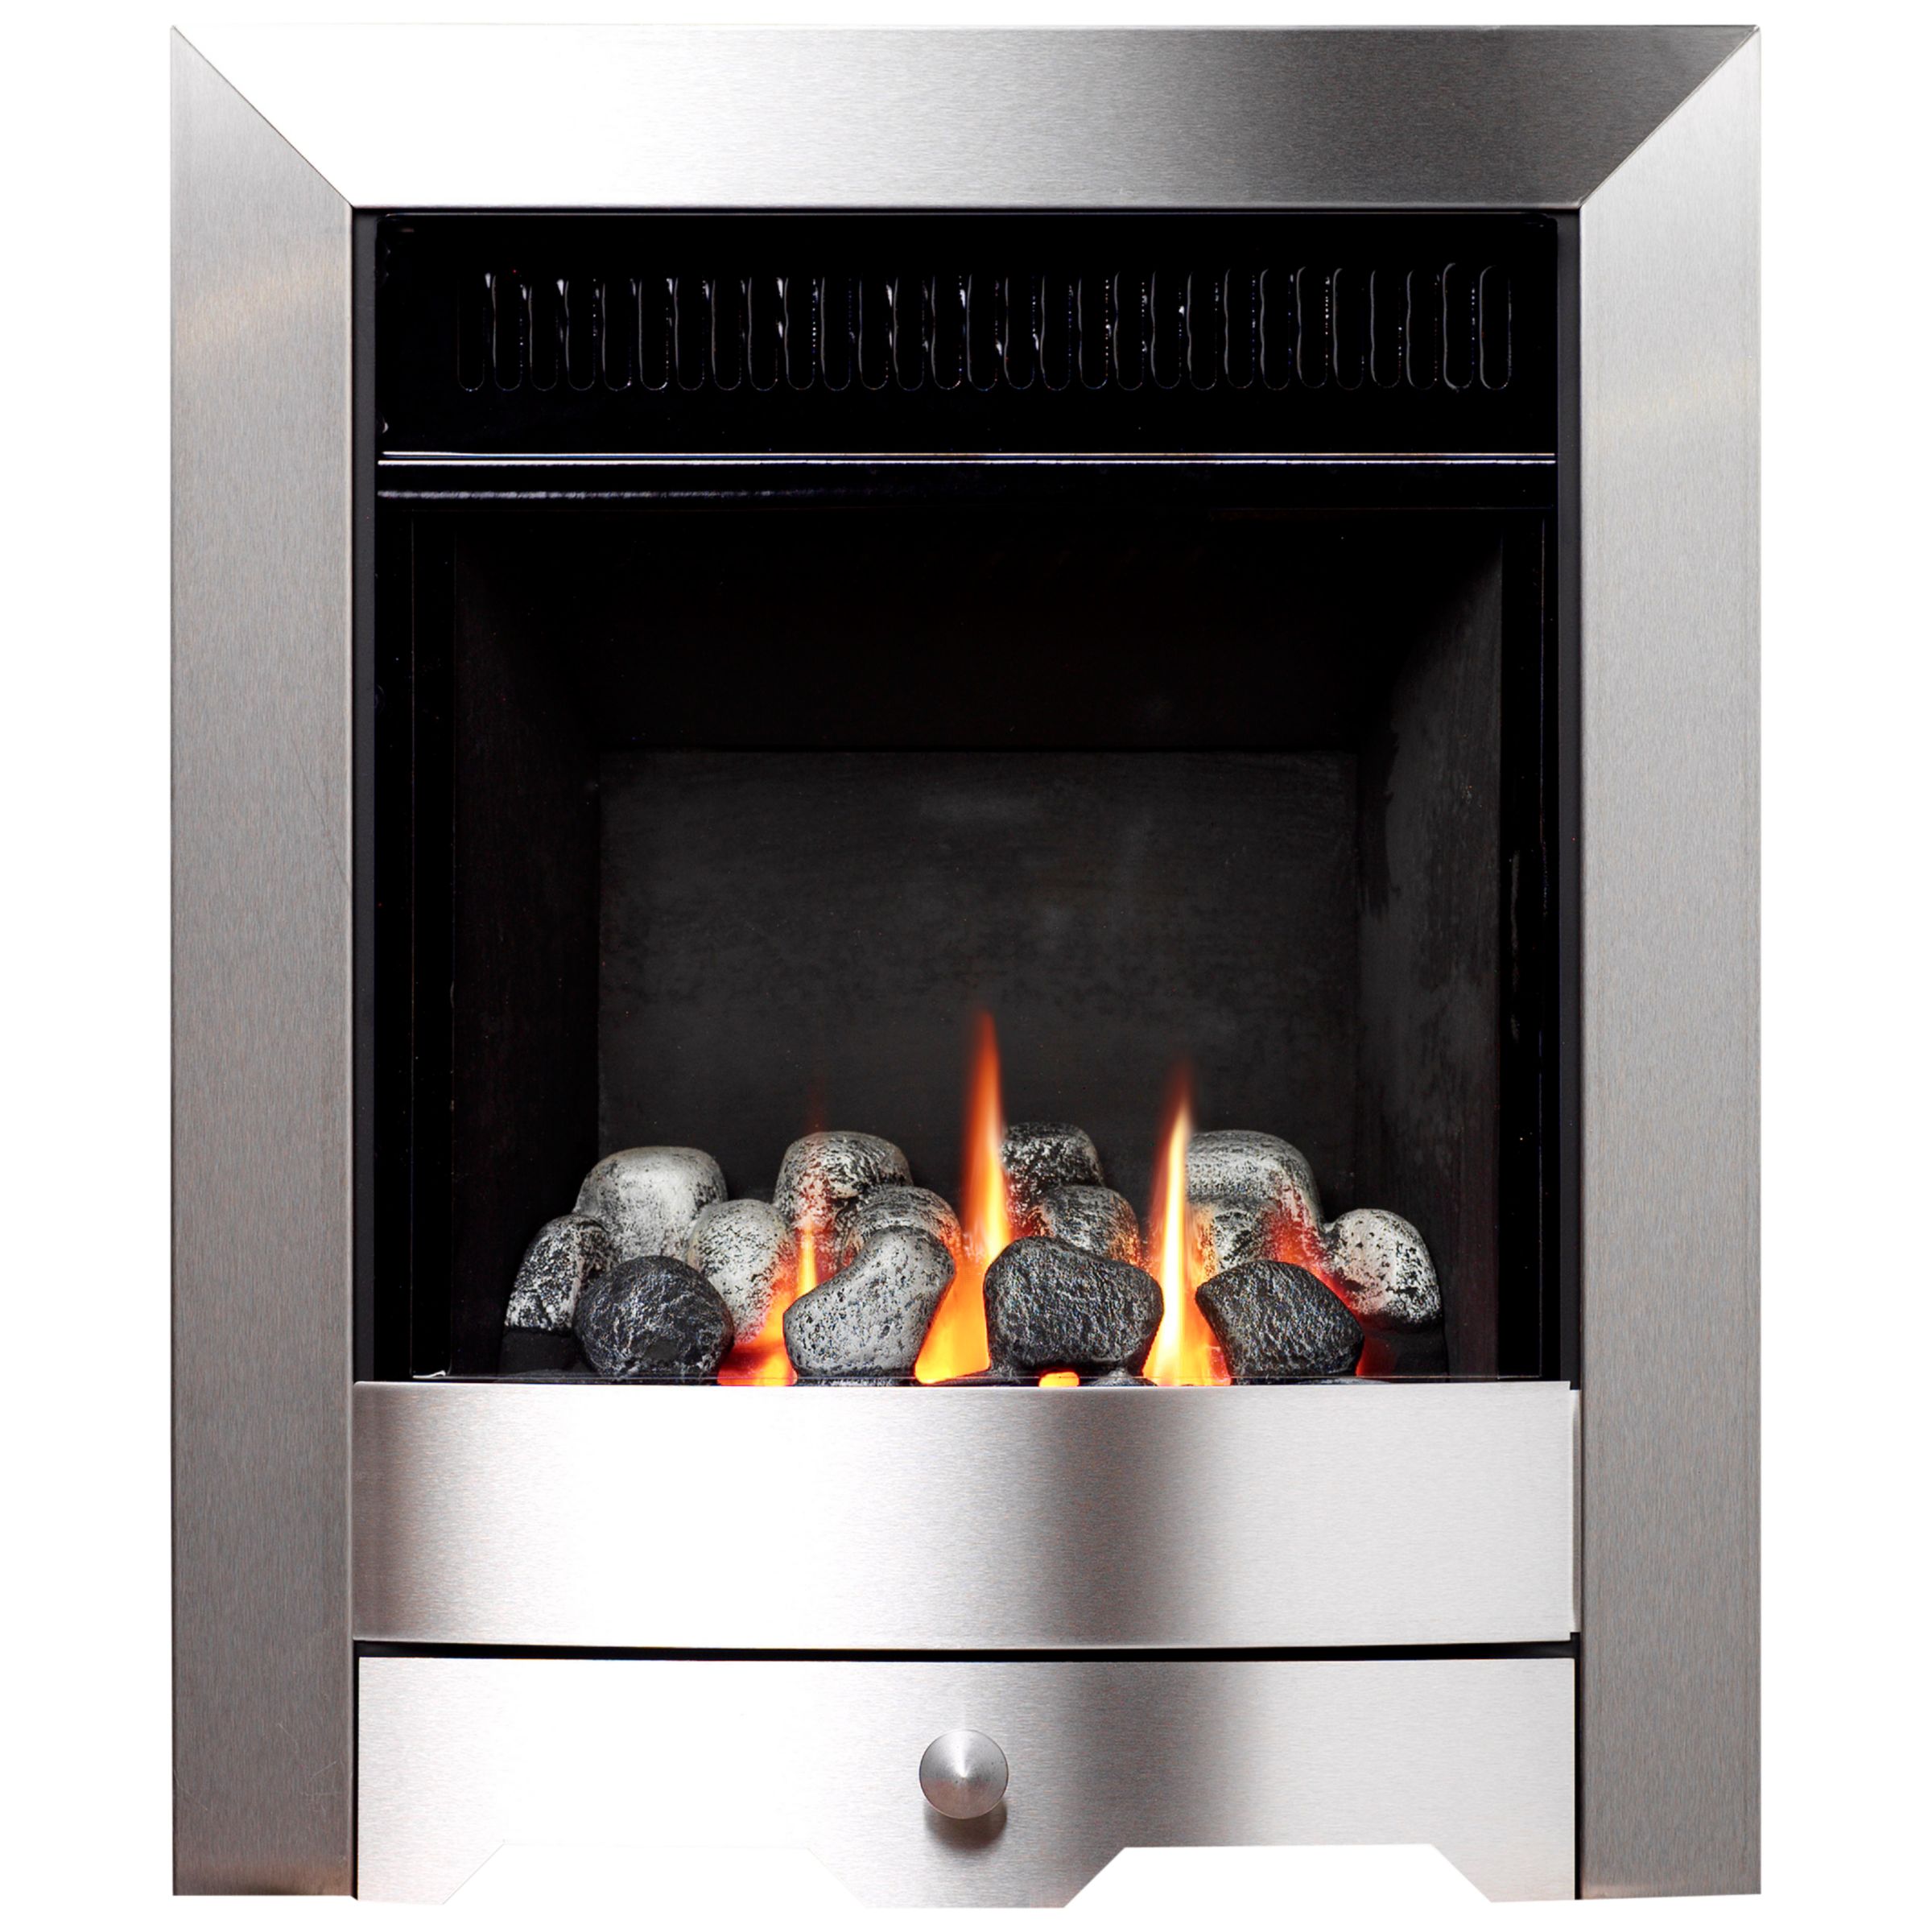 Burley Flueless Gas Fire, Environ 4247, Brushed Steel at John Lewis